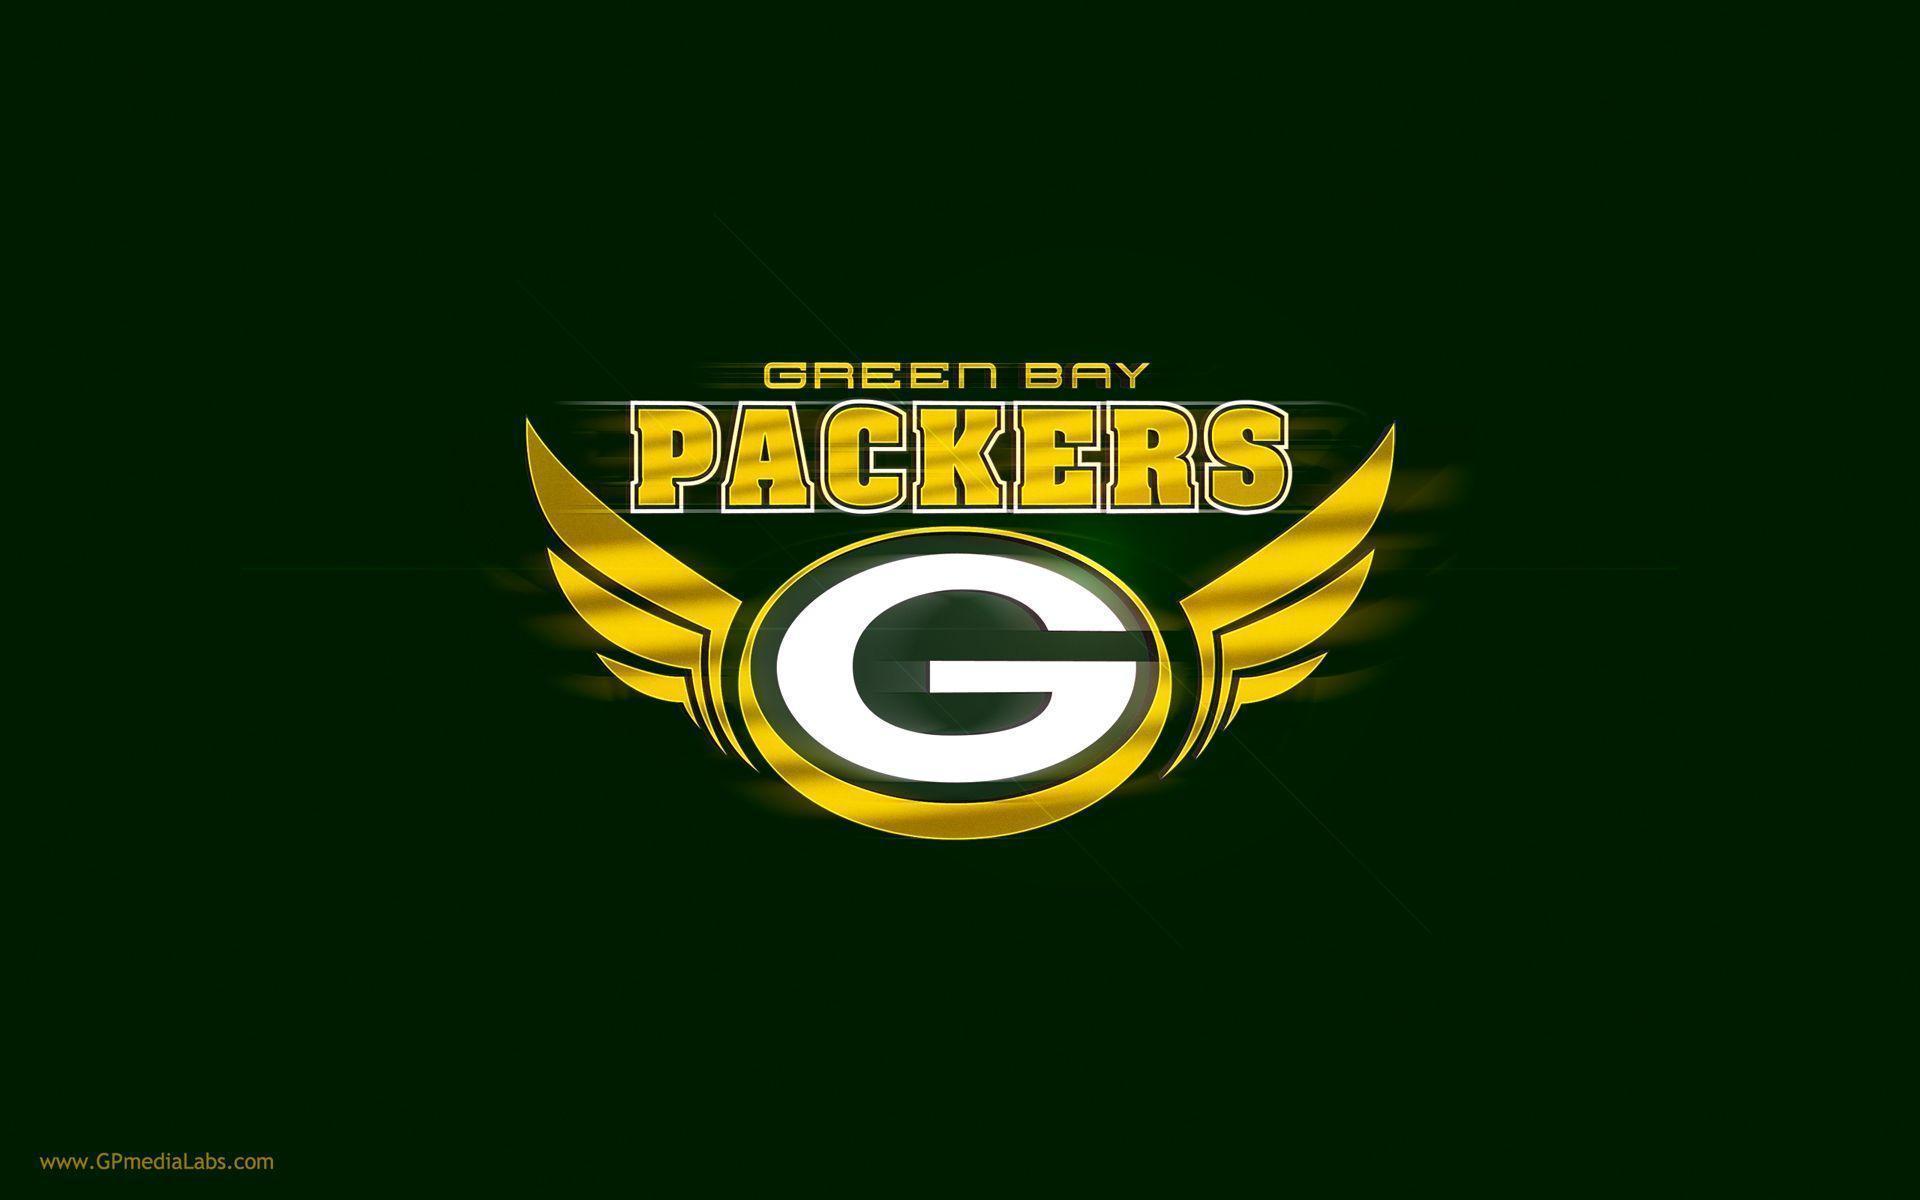 Google Image Result for /packers